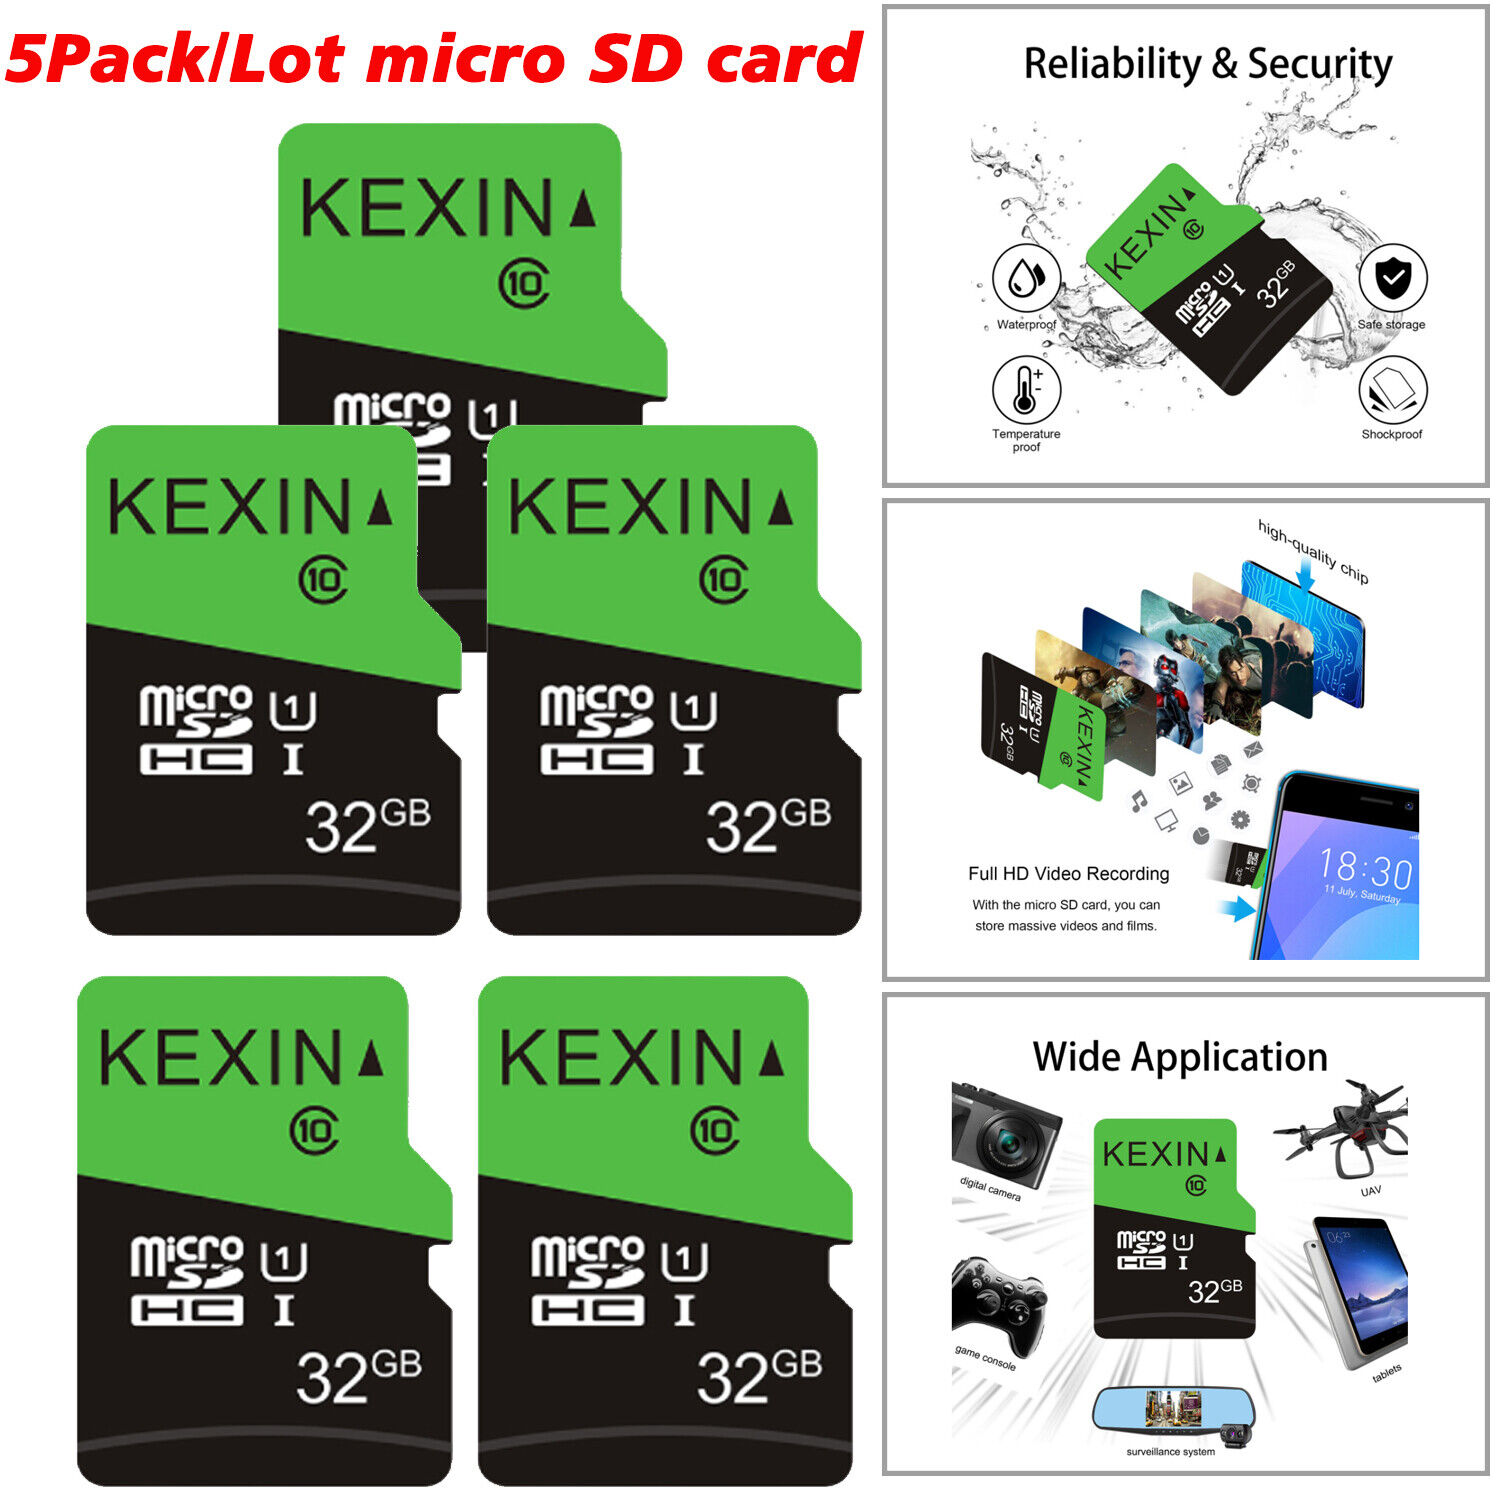 5PACK/Lot 32GB Micro SD Card SDHC Memory Card TF Class 10 SD High Speed TF Cards Kexin Does Not Apply